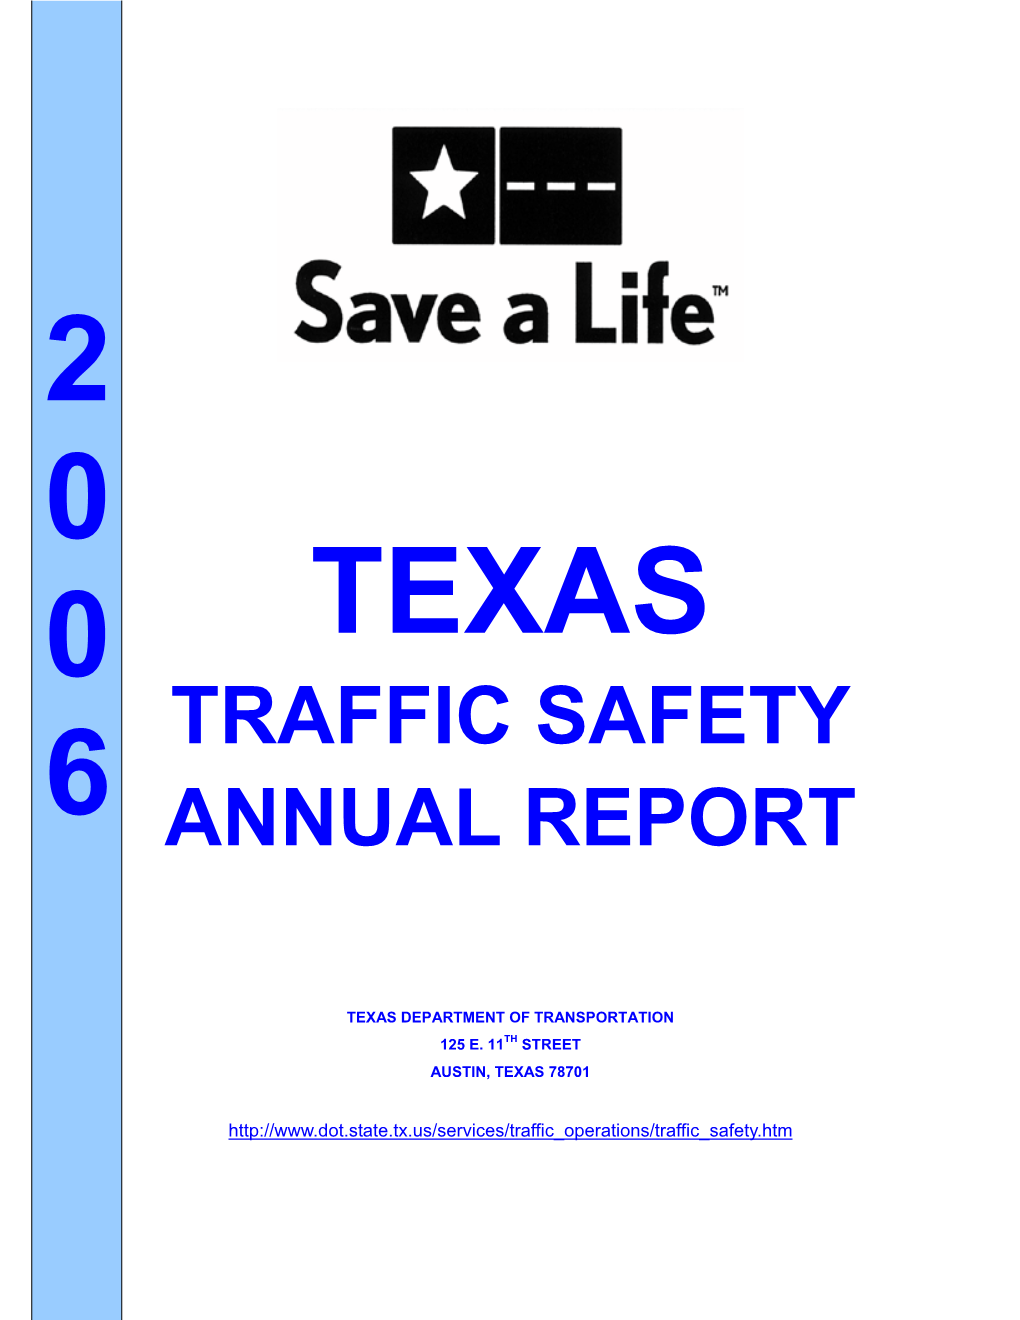 Texas Traffic Safety Annual Report 2006